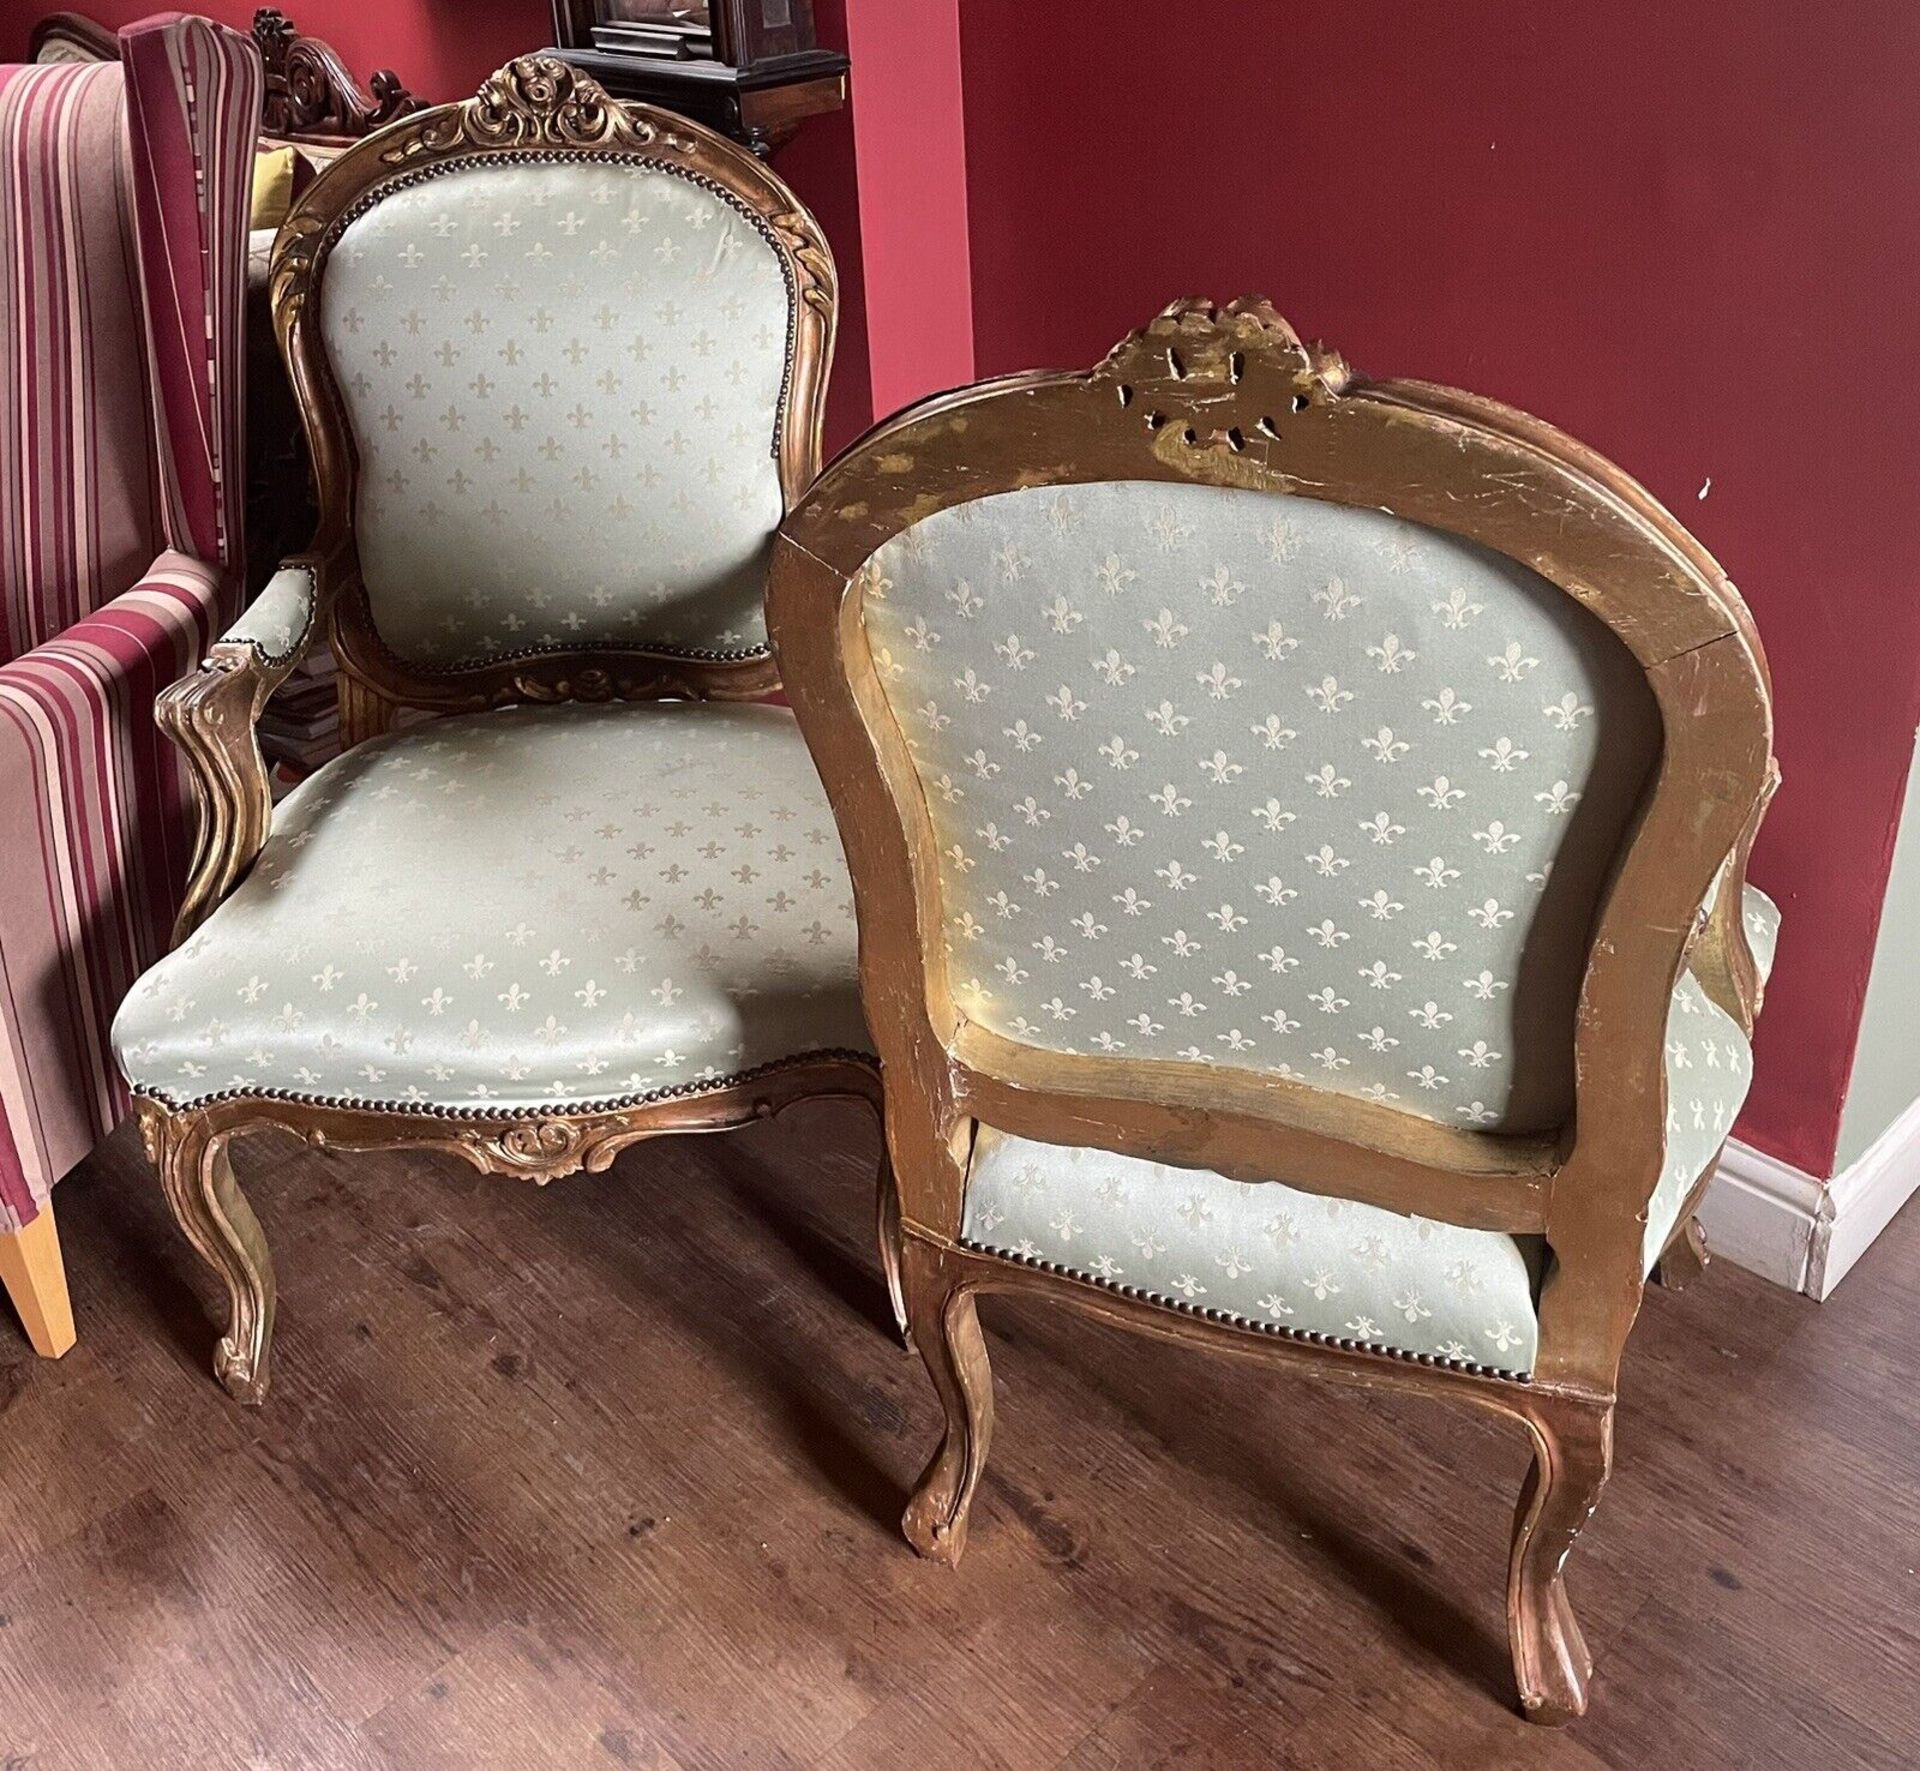 A Pair of Fauteuils In Louis XVI Style Carved Gilt Wood Arm Chairs Upholstered In Fleur De Lys - Bild 4 aus 10